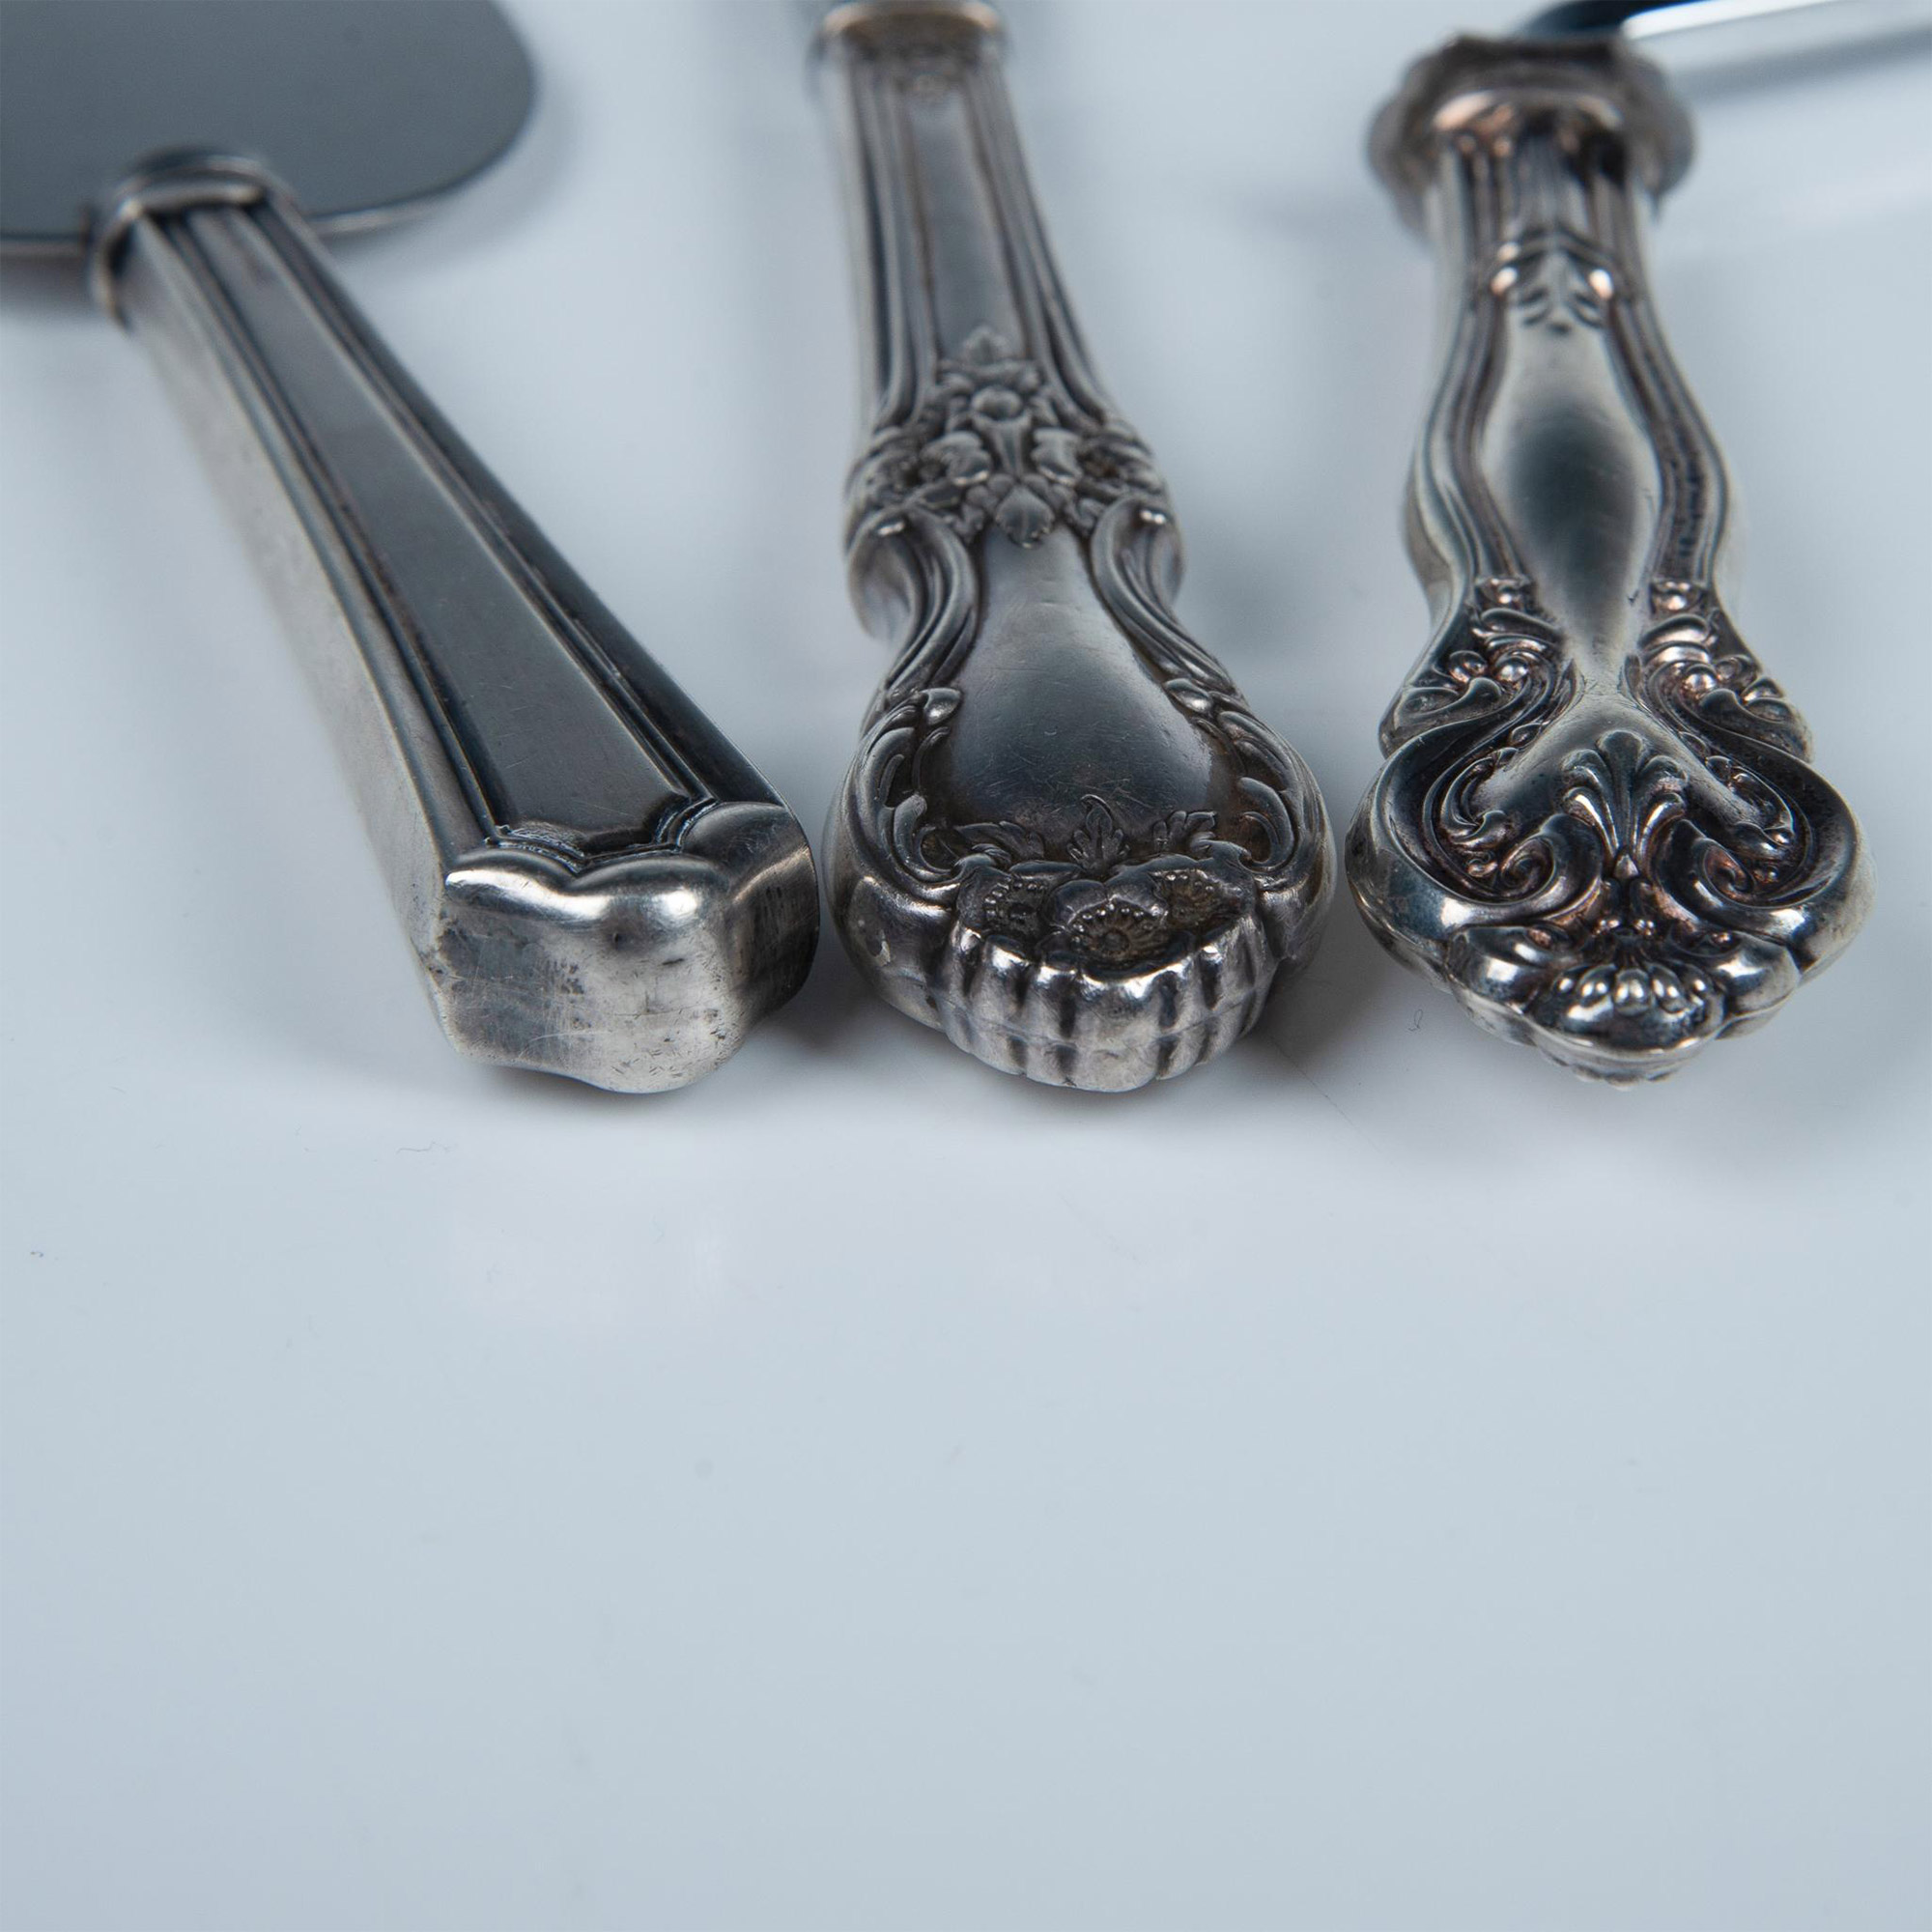 3pc Sterling Silver Cake Serving Set - Image 3 of 4